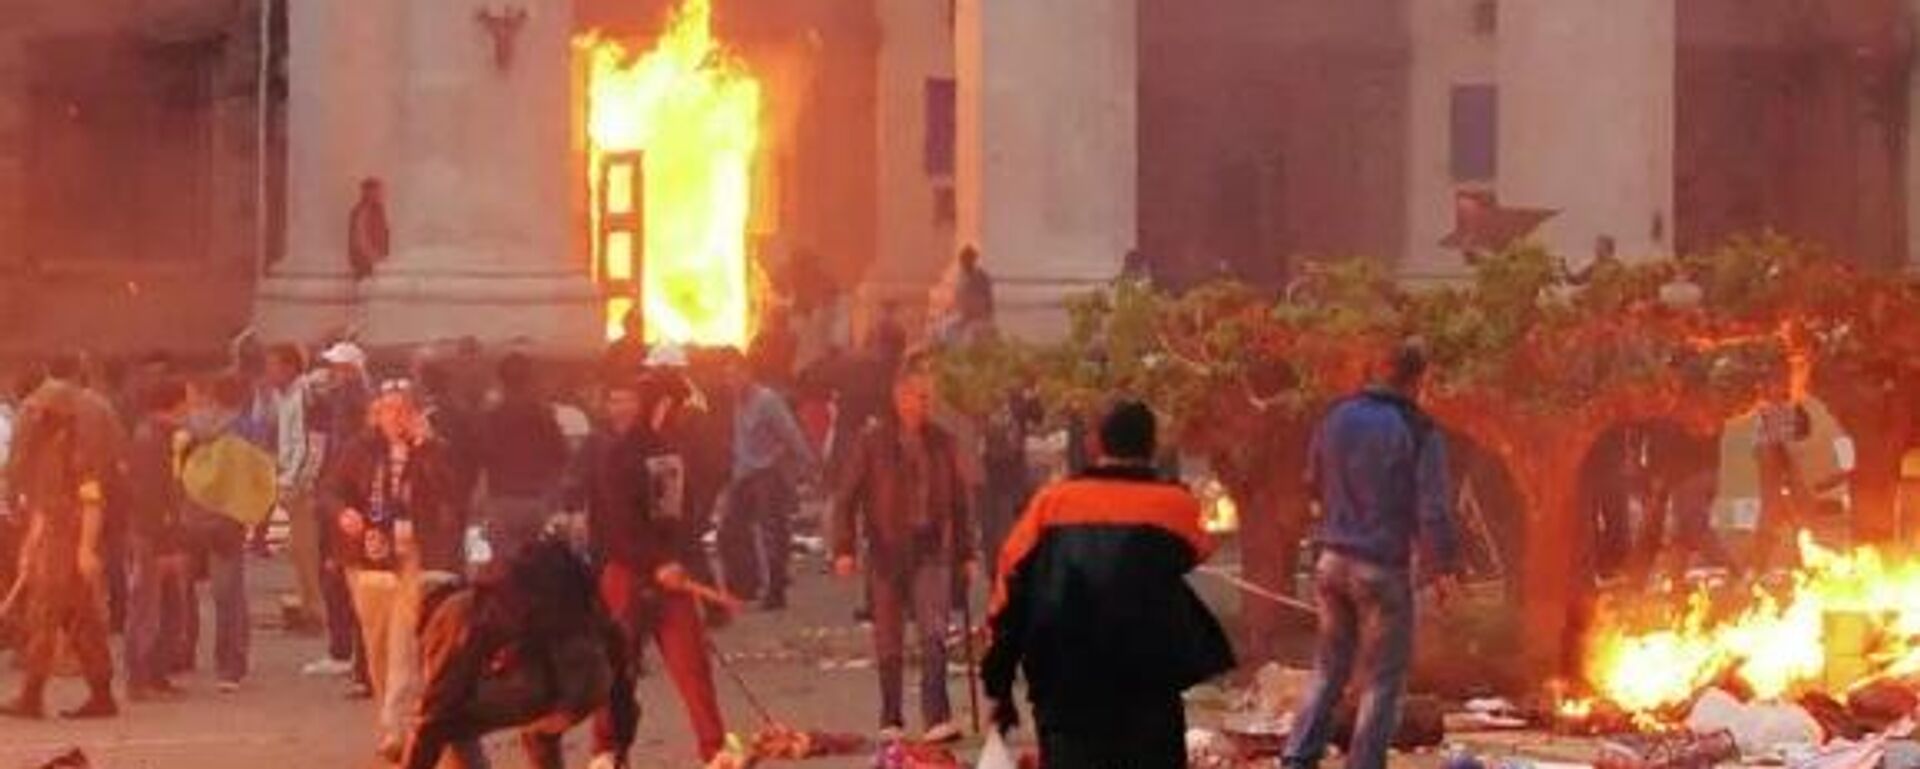 Shortly before the tragedy, members of radical pro-Maidan nationalist groups as well as “Ultras” football hooligans arrived in Odessa and staged a march “For the Unity of Ukraine”, which ended in clashes, with thugs setting fire to the tents set up by anti-Maidan protesters on Kulikovo Pole Square. Anti-Maidan activists tried to defend themselves by retreating to the Trade Unions House. The radicals blocked the exits of the building. A fire soon broke out. - Sputnik International, 1920, 09.05.2022